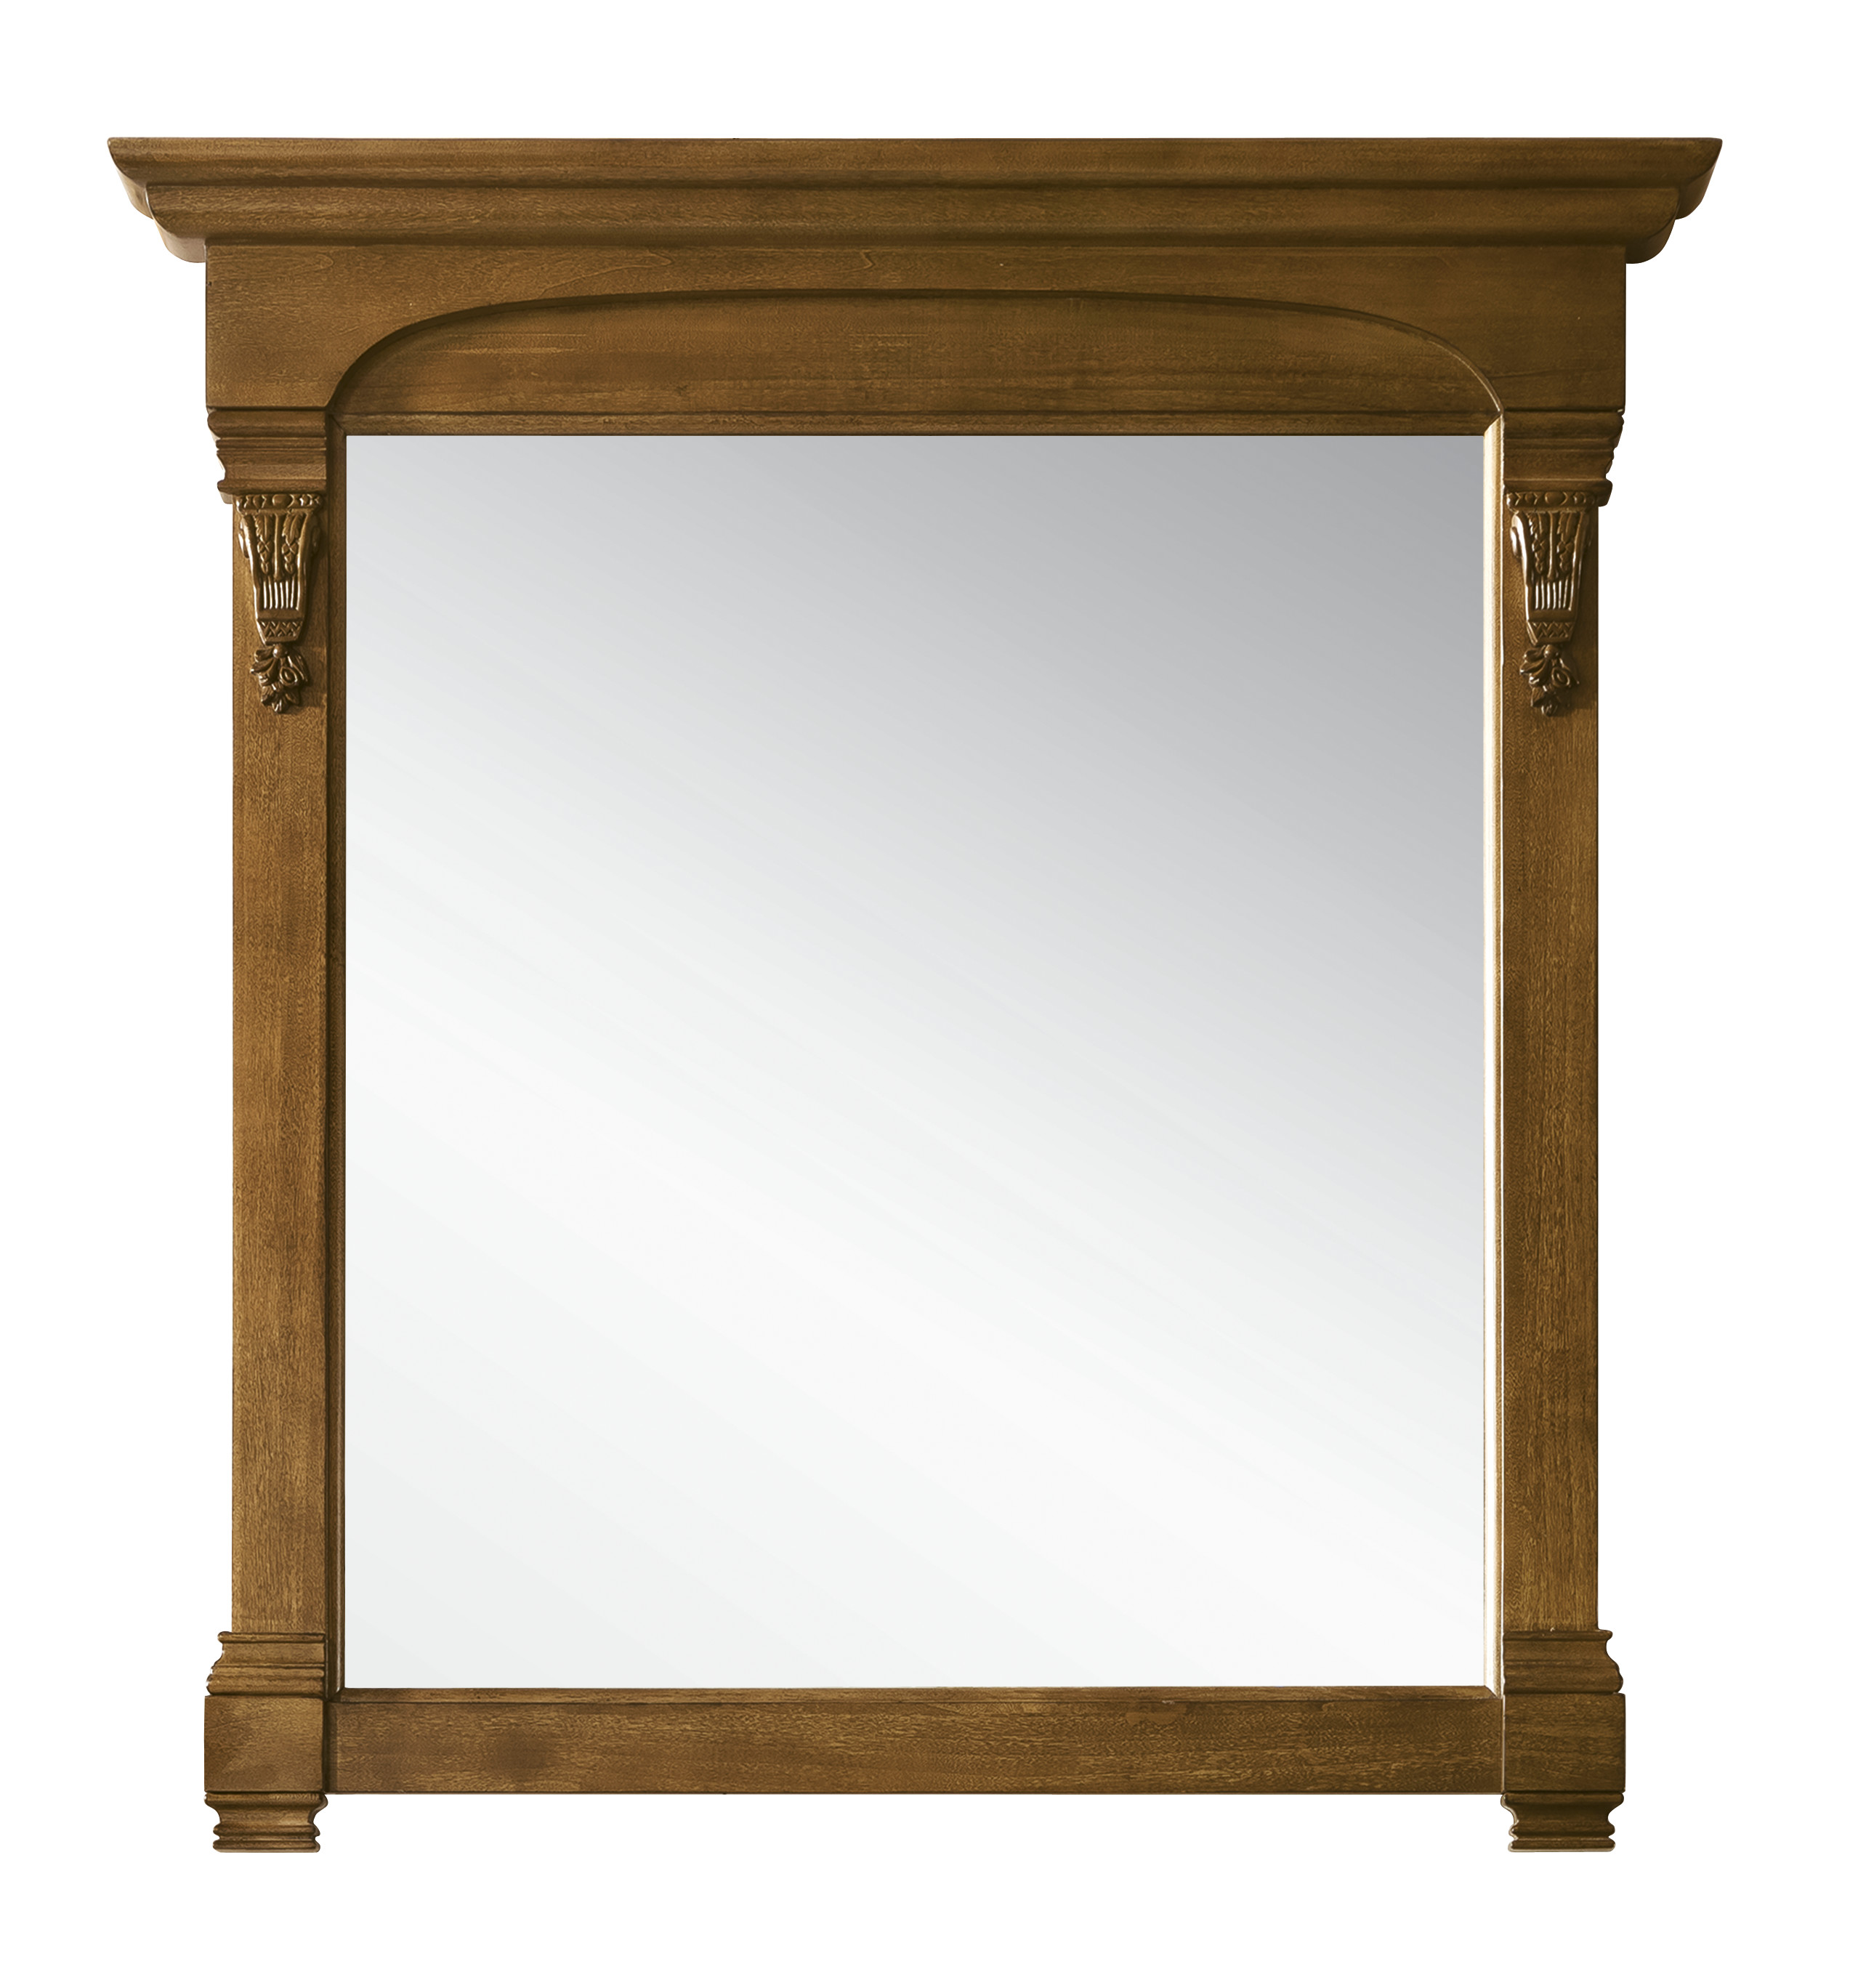 James Martin 147-114-5375 Brookfield 39.5" Mirror, Country Oak - Click Image to Close